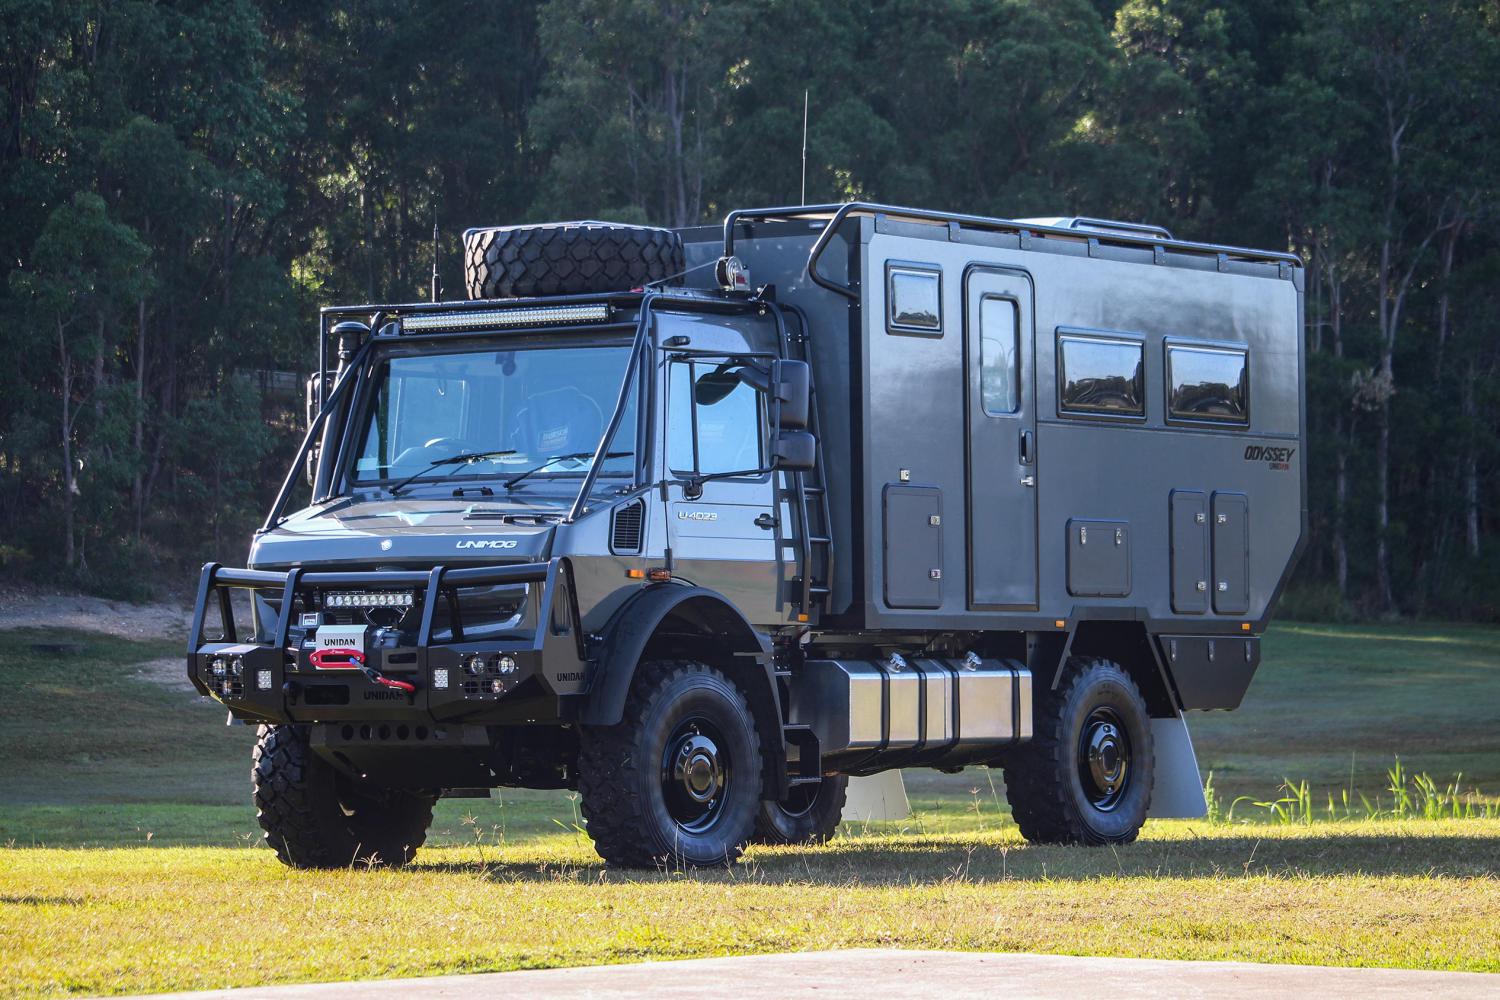 Image for 2019 Unidan Odyssey Expedition Vehicle